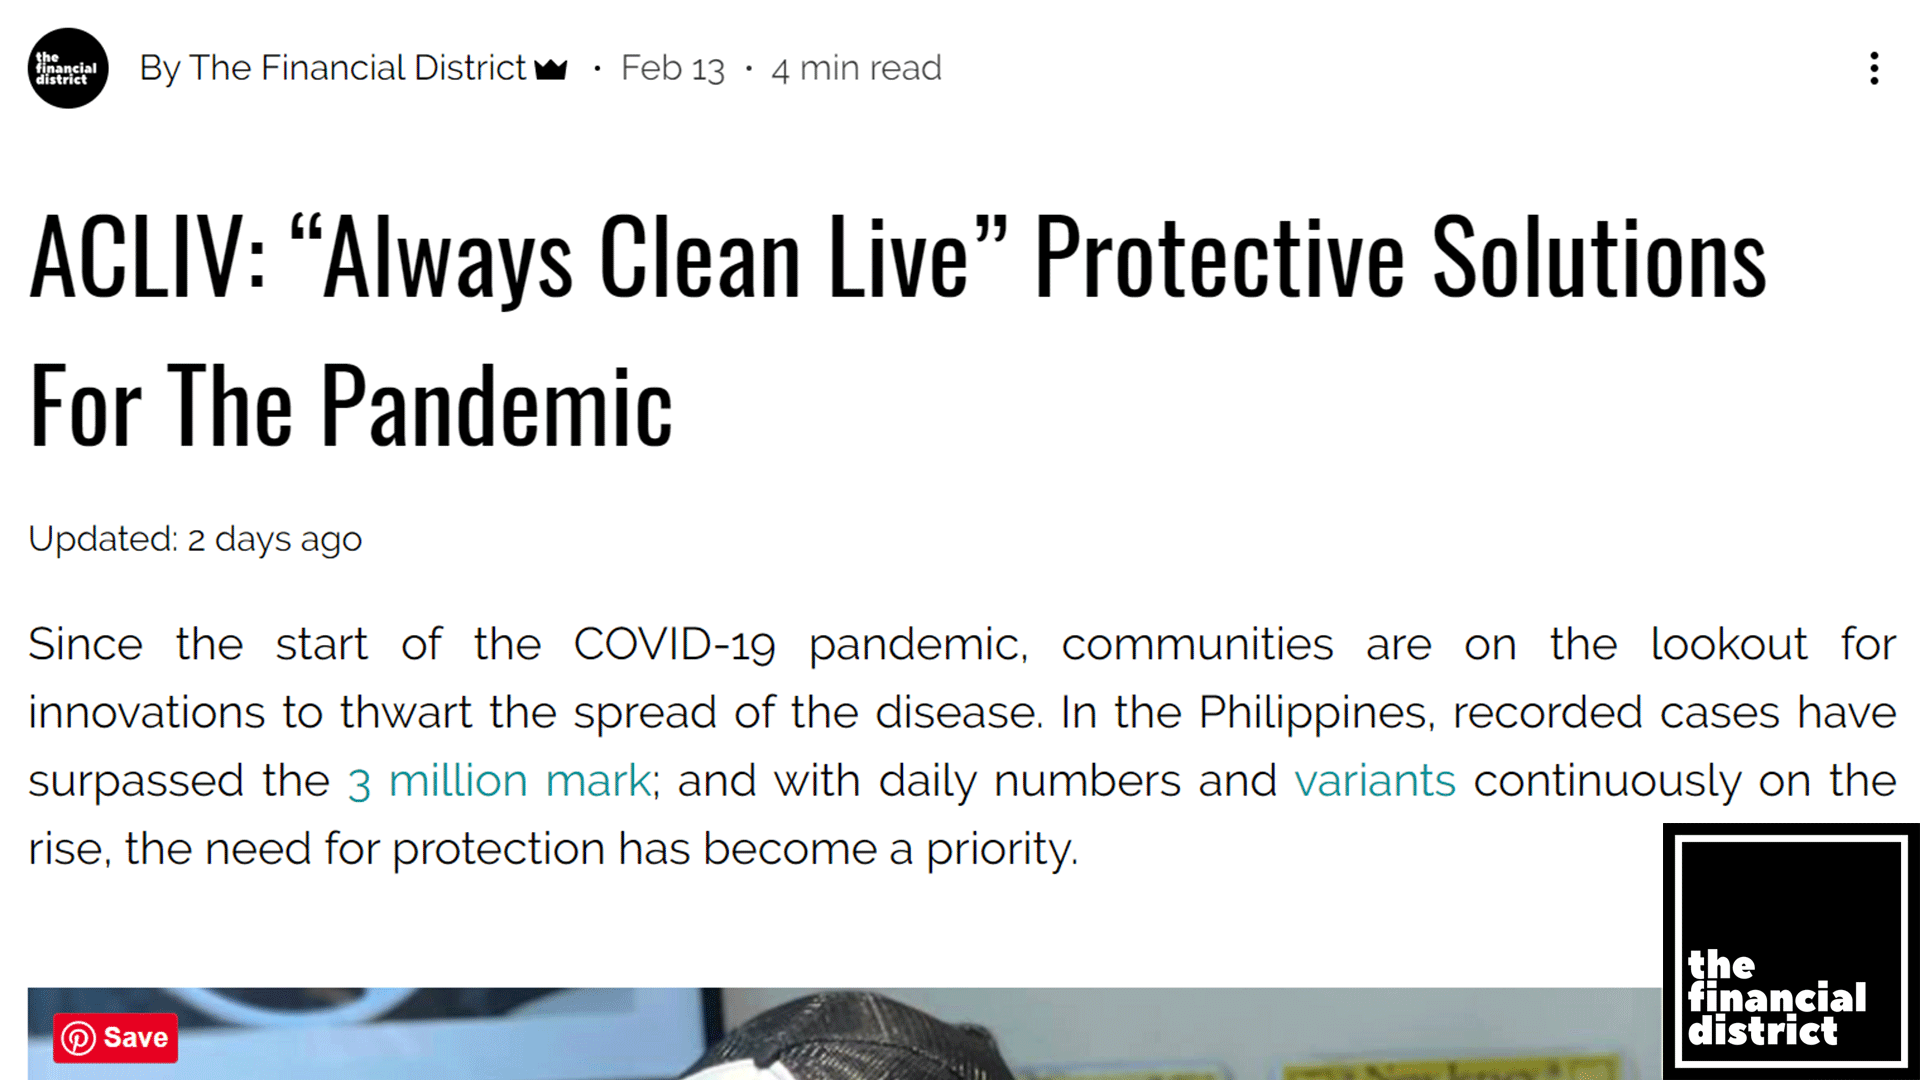 The Financial District - ACLIV: “Always Clean Live” Protective Solutions For The Pandemic